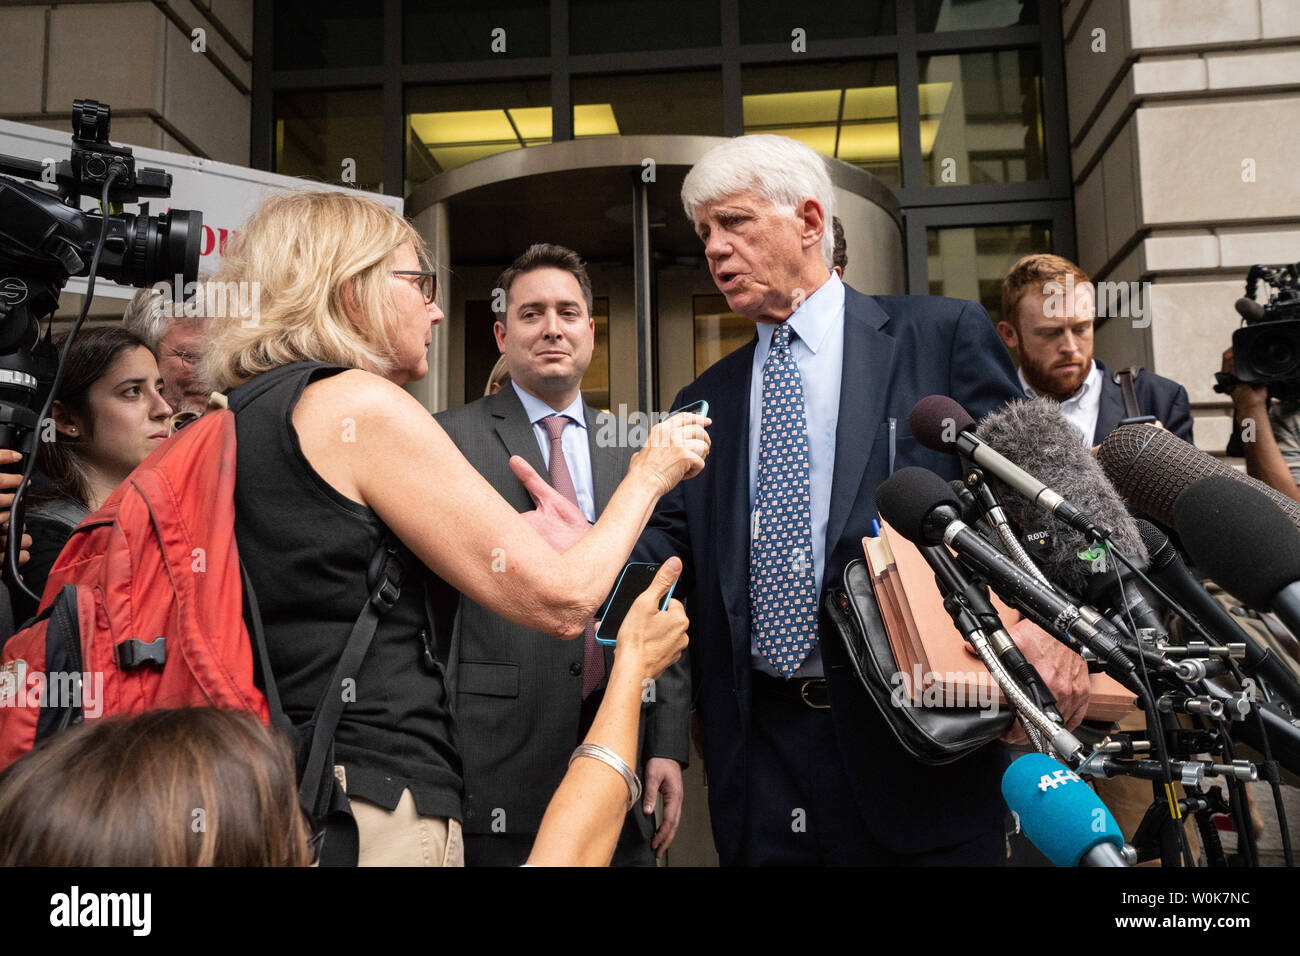 Thomas Breen, attorney for former Trump Campaign aide George Papadopoulos, speaks to members of the media outside U.S. District Court House in Washington, D.C. September 7, 2018.     Photo by Ken Cedeno/UPI Stock Photo